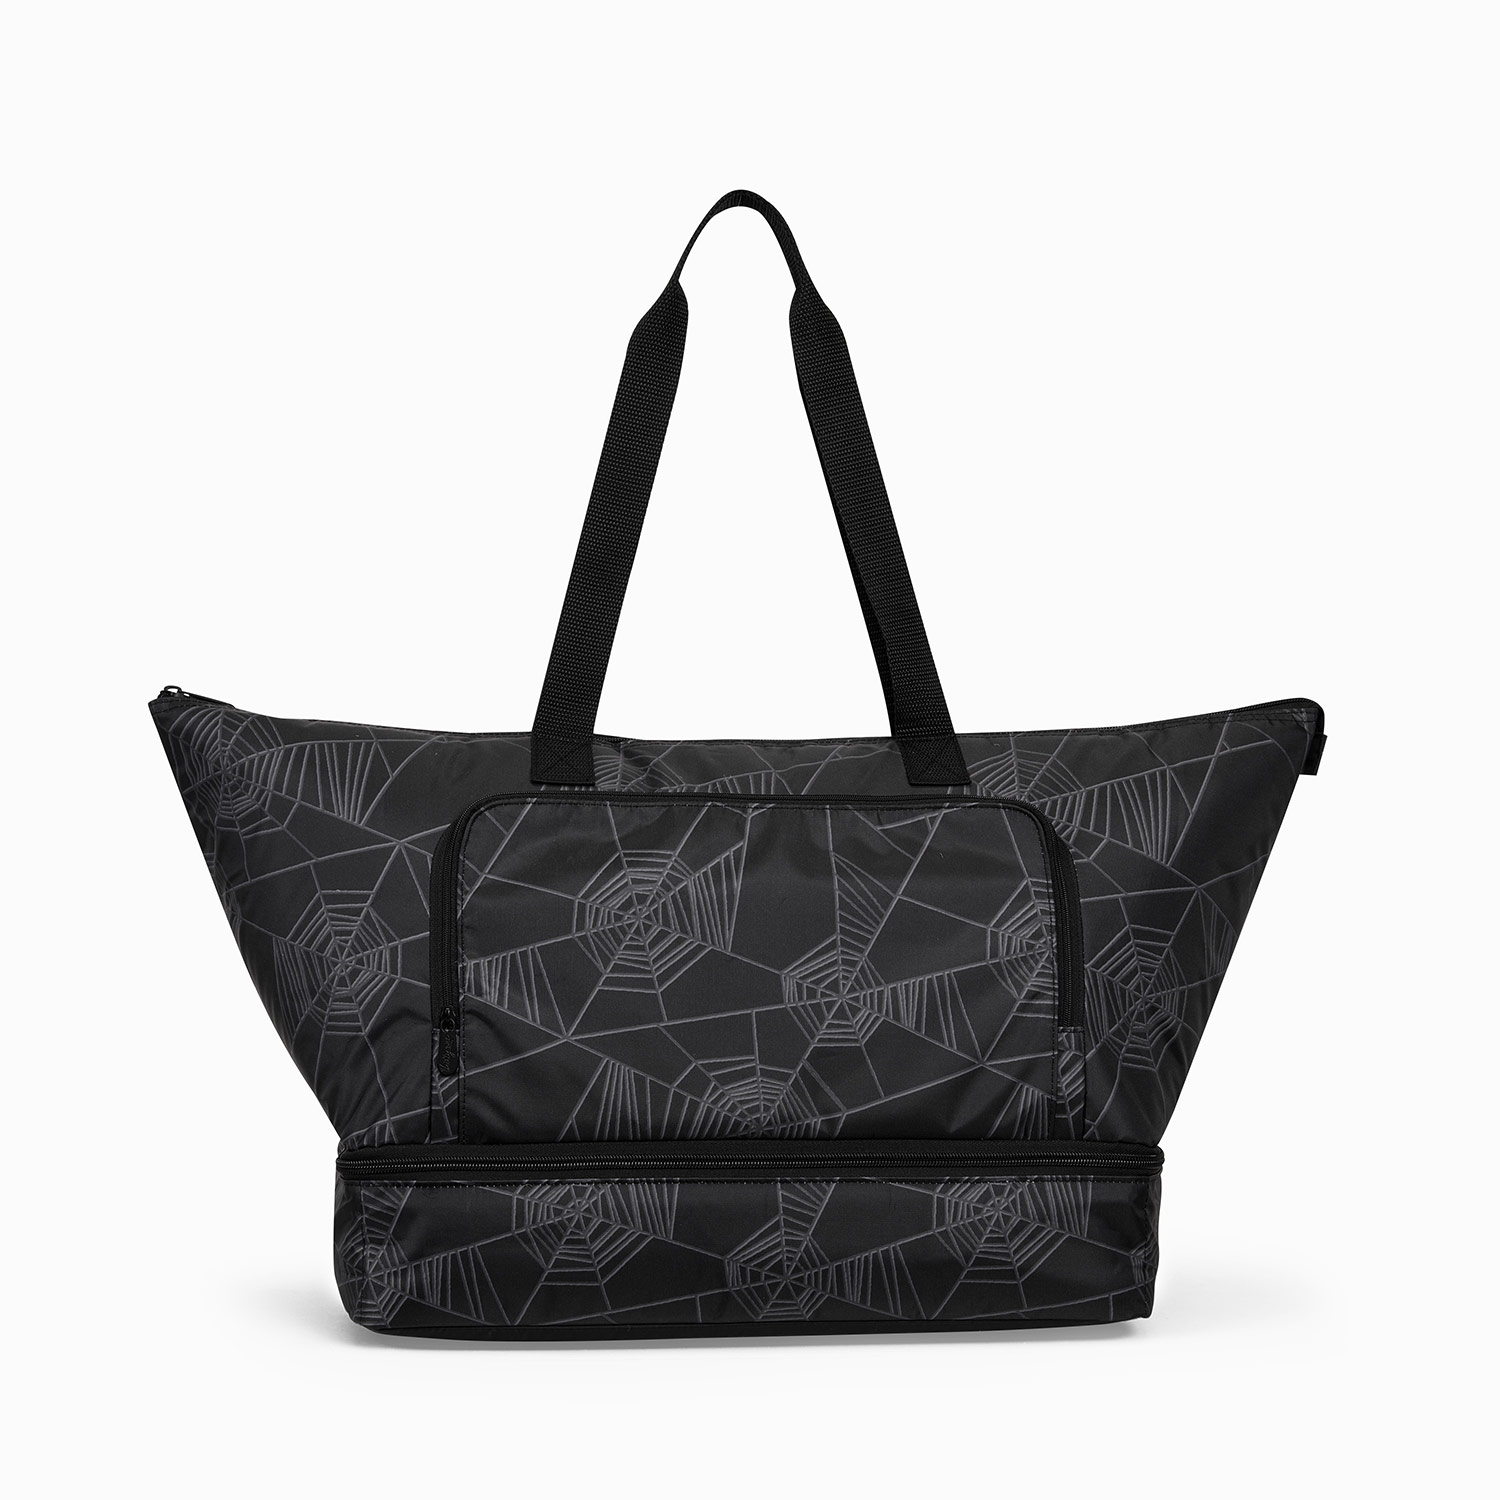 UTILITY Totes from Thirty-One with Andrea Carver 